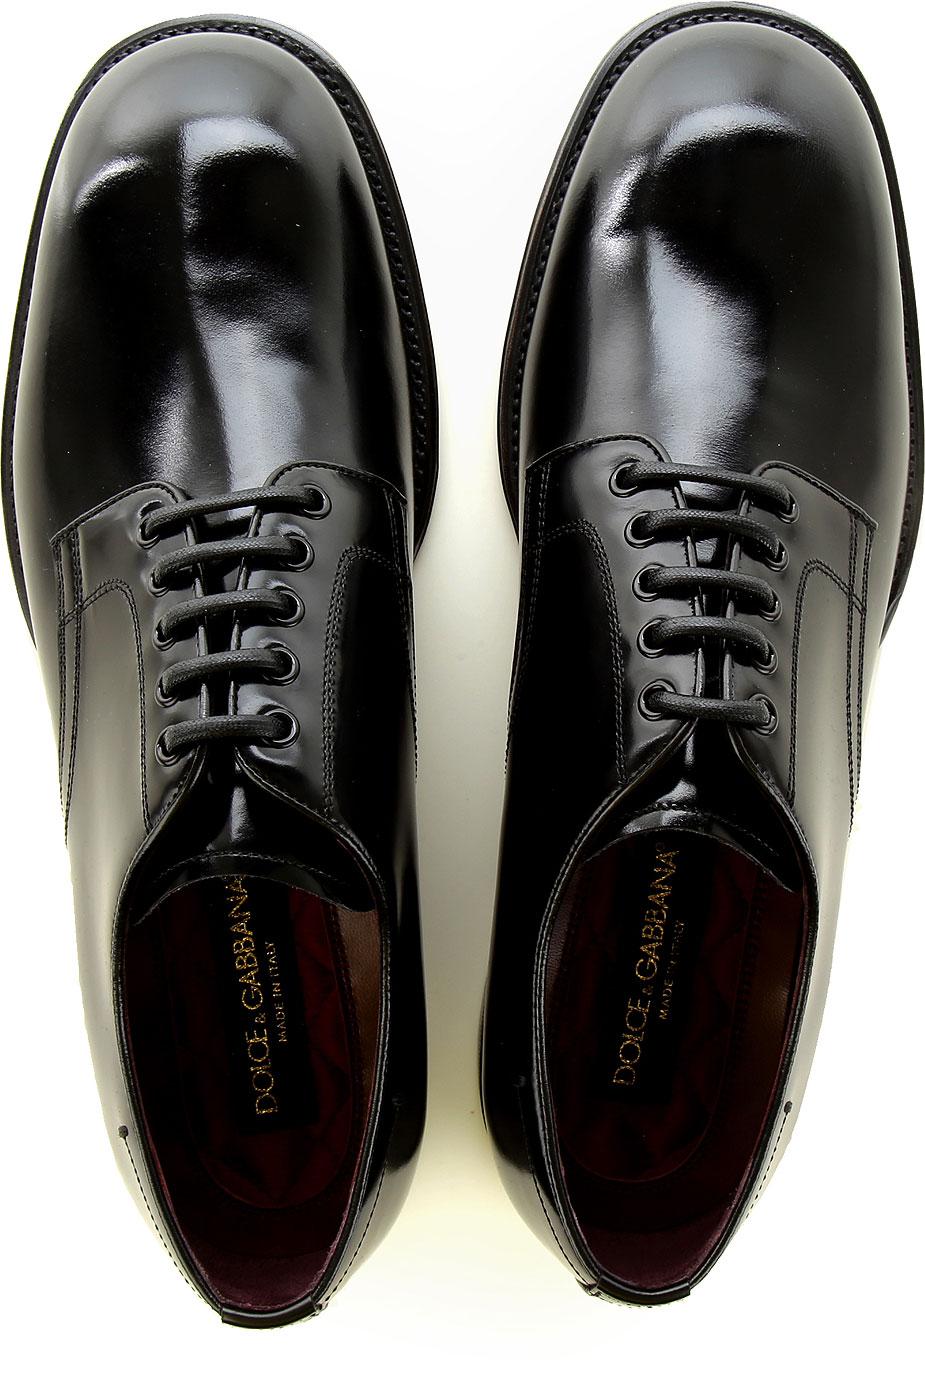 Mens Shoes Dolce & Gabbana, Style code: a10664-a1203-80999